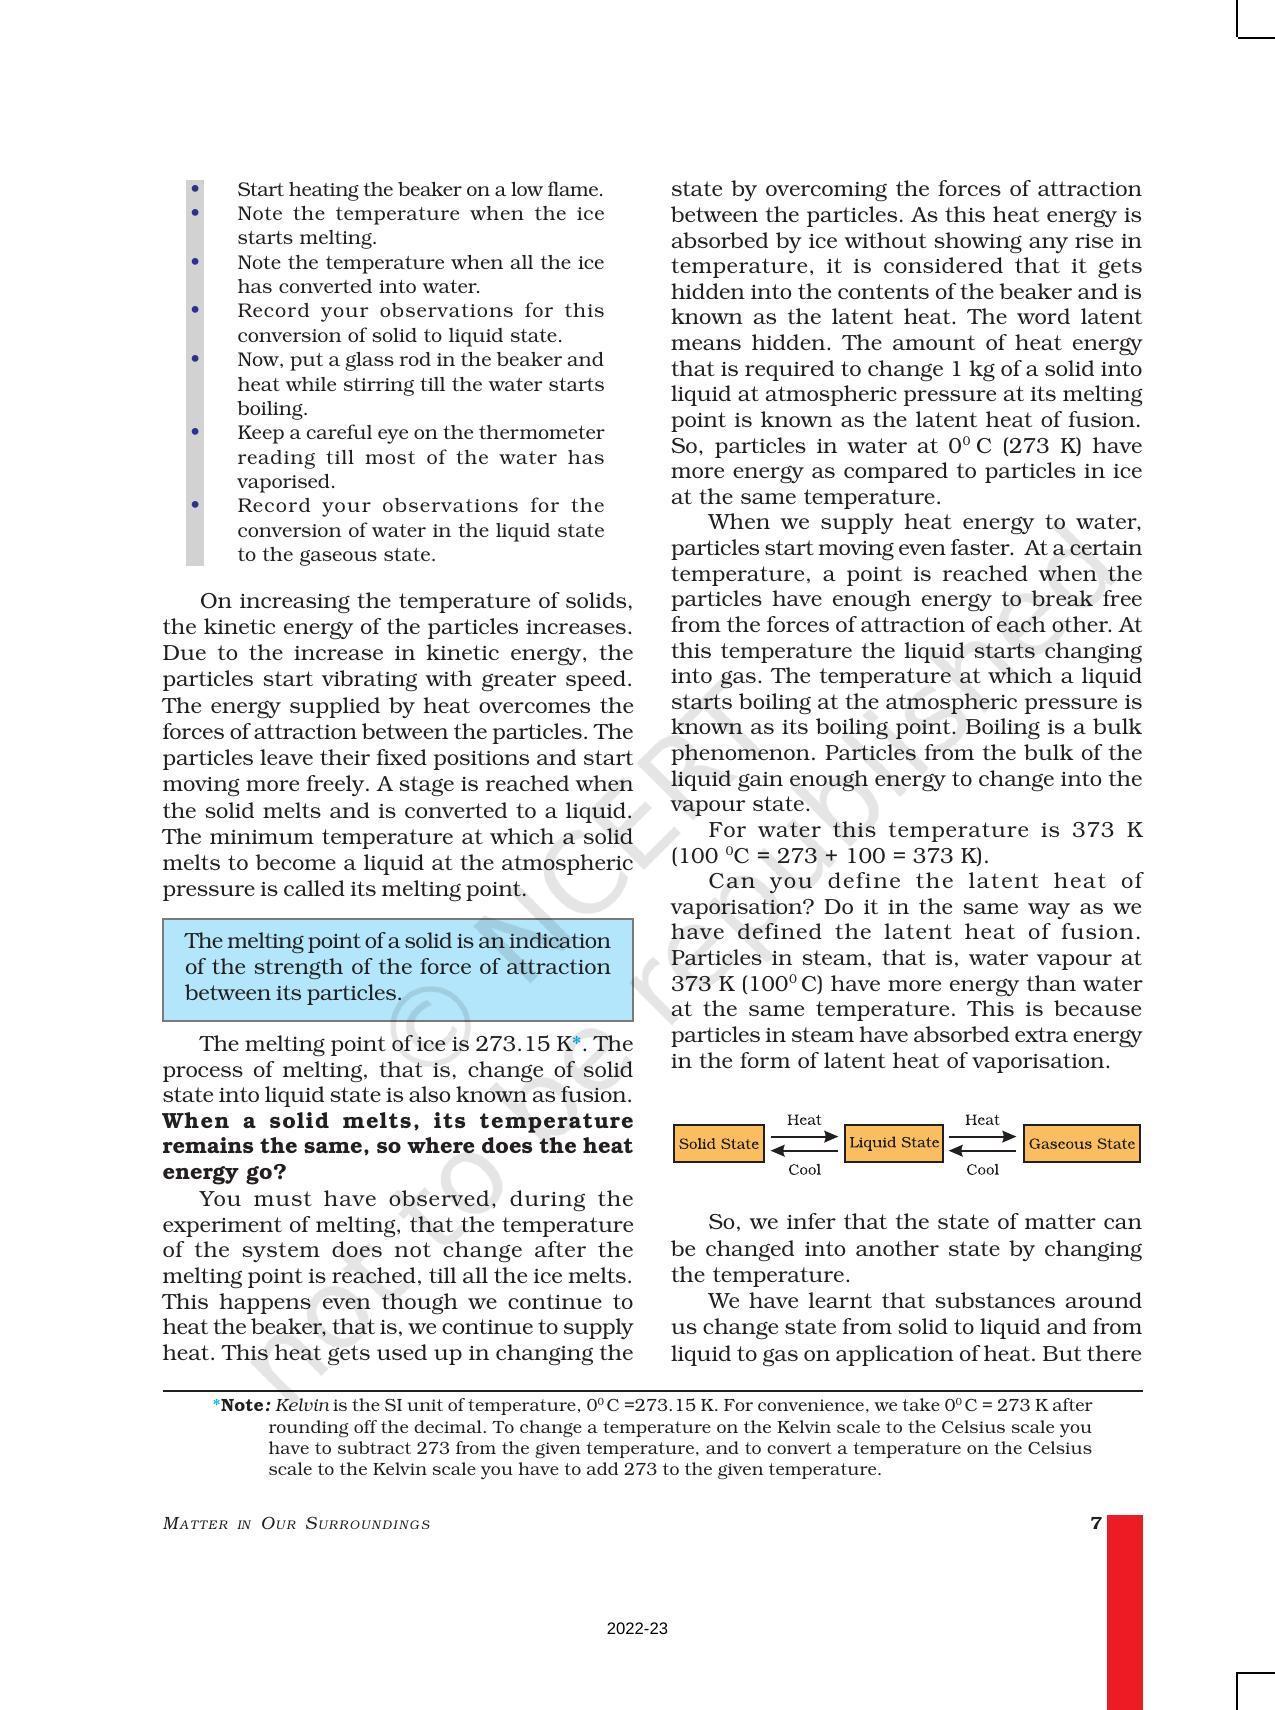 NCERT Book for Class 9 Science Chapter 1 Matter in Our Surroundings - Page 7